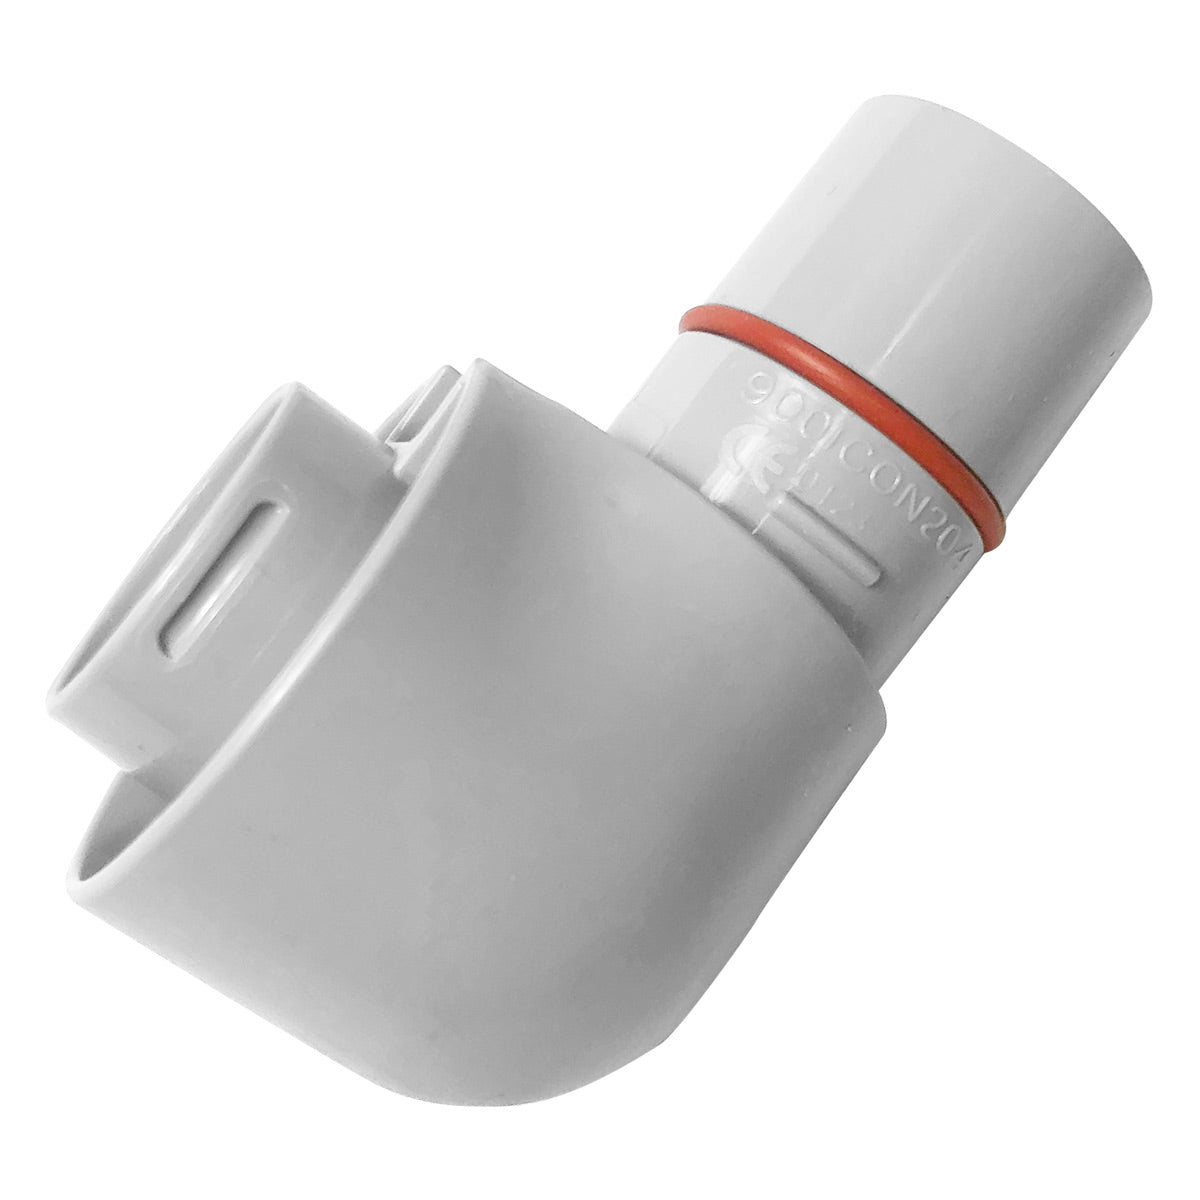 Tubing Elbow for F&P ICON Series CPAP Machines - DISCONTINUED